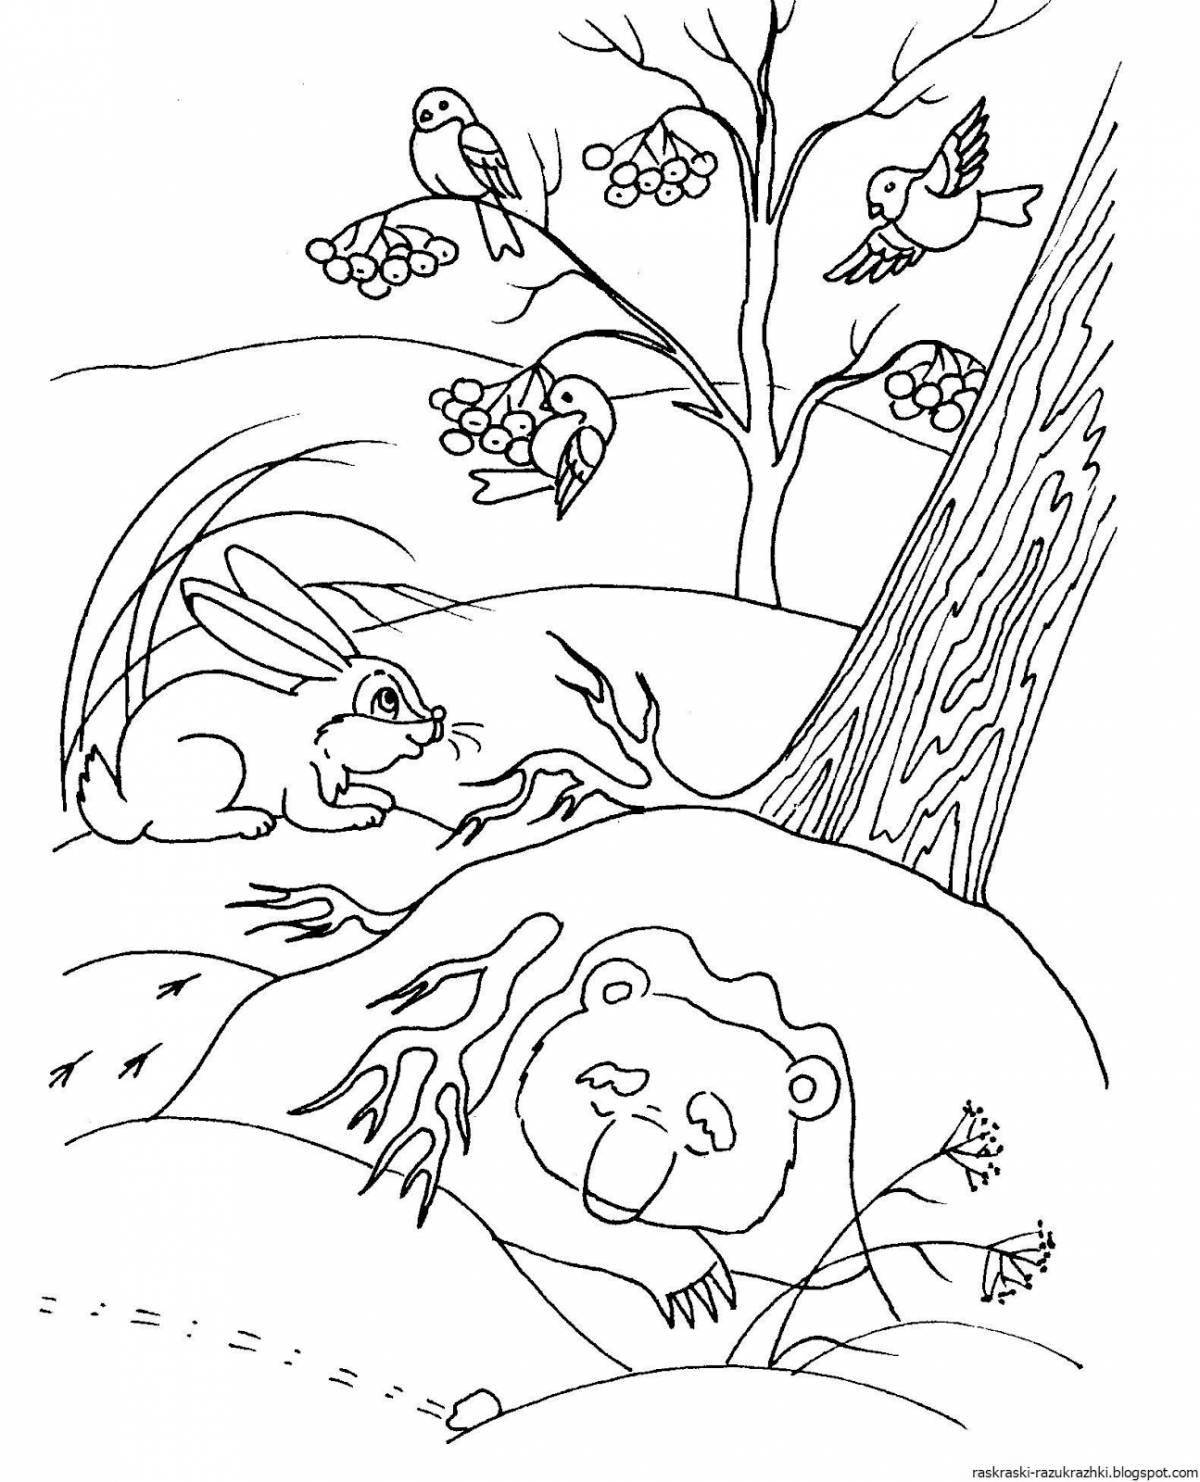 Exotic animal coloring pages in winter